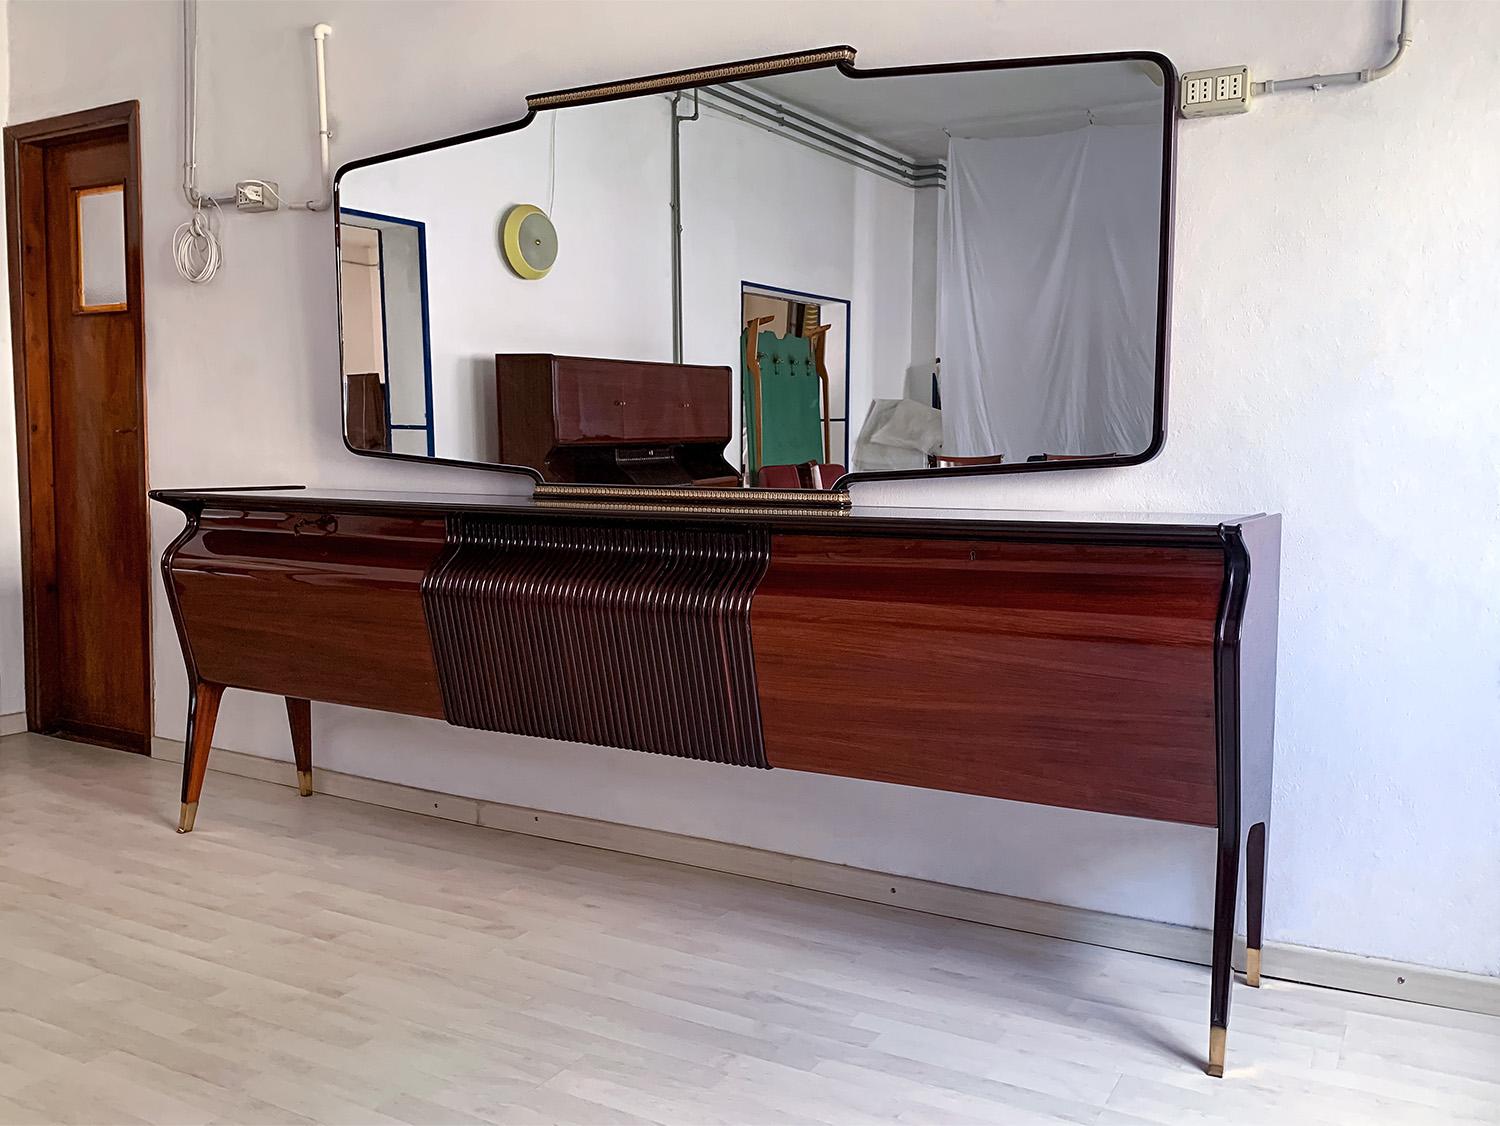 Impressive Sideboard or Buffet with mirror, designed by Osvaldo Borsani in the 1950s.
The cabinet has a long black glass top, and is characterized by a unique shape design given by its amazing curved frontal profile, equipped with three drop-down